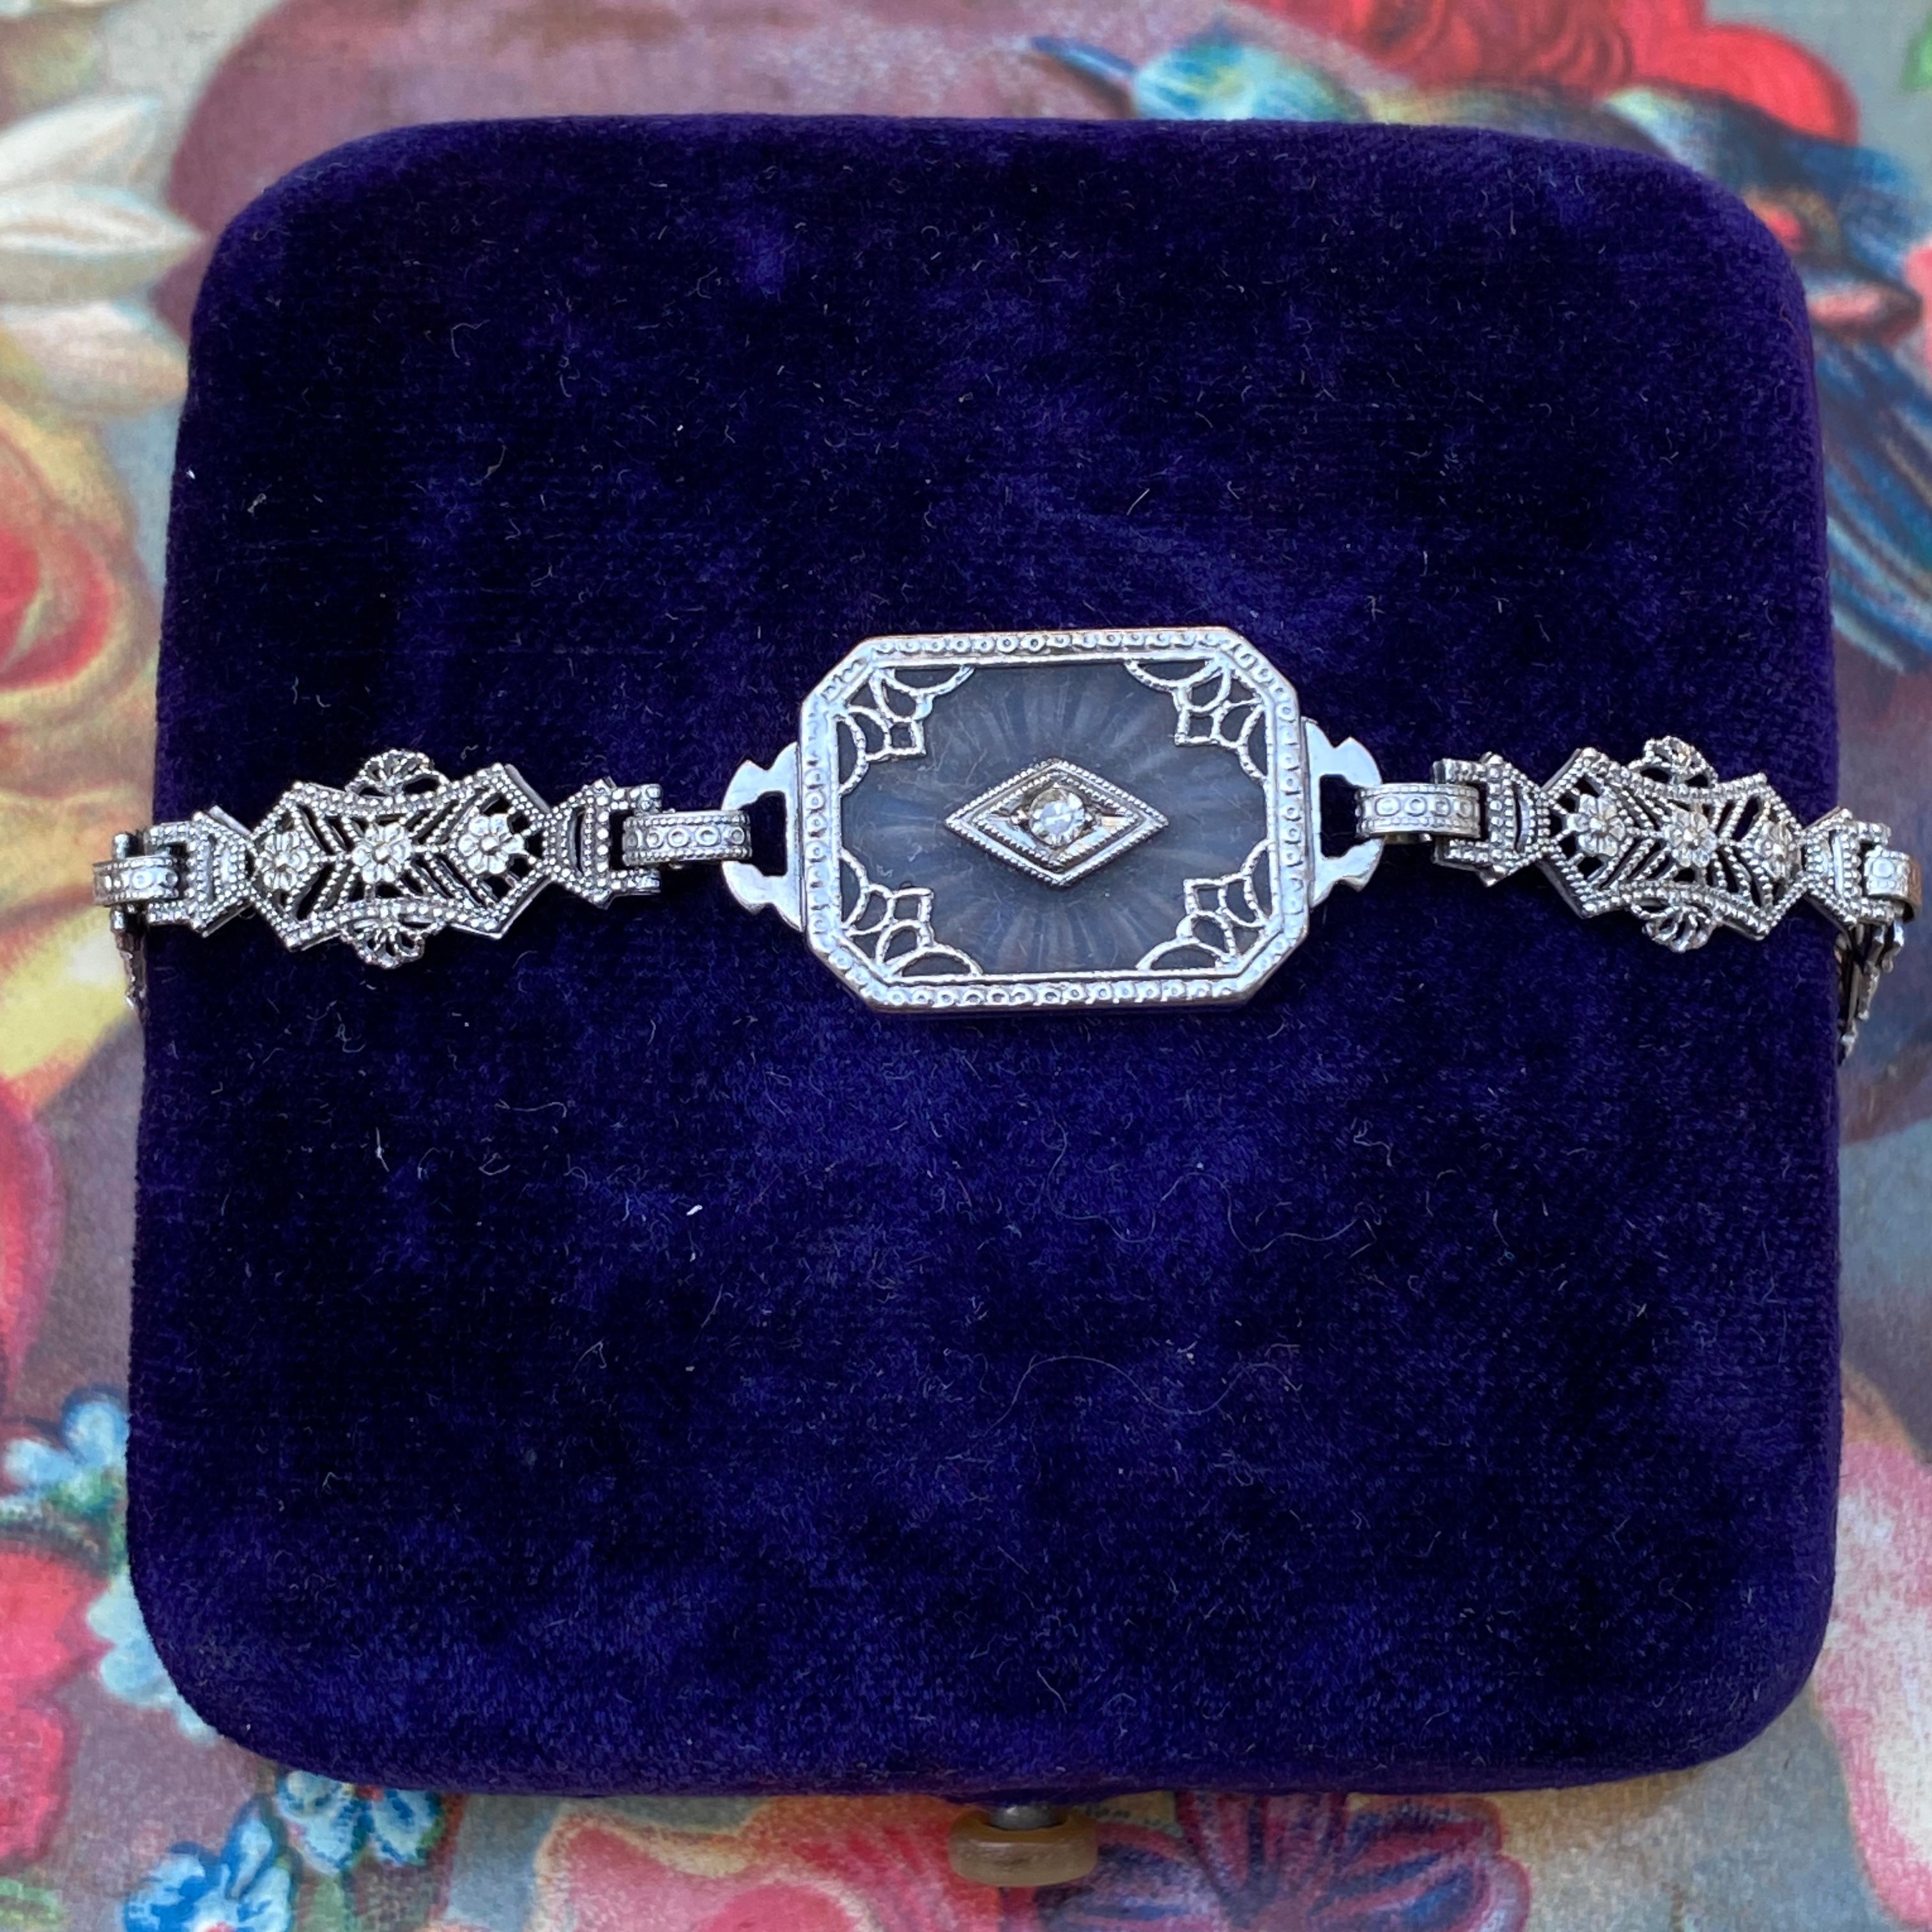 Details:
Stunning delicate Art Deco carved rock crystal 10K white gold filigree bracelet from the 1920's with diamond. The diamond is 2mm round. Rock Crystal was often used during the Art Deco period, is frosted on one side and carved in a burst or